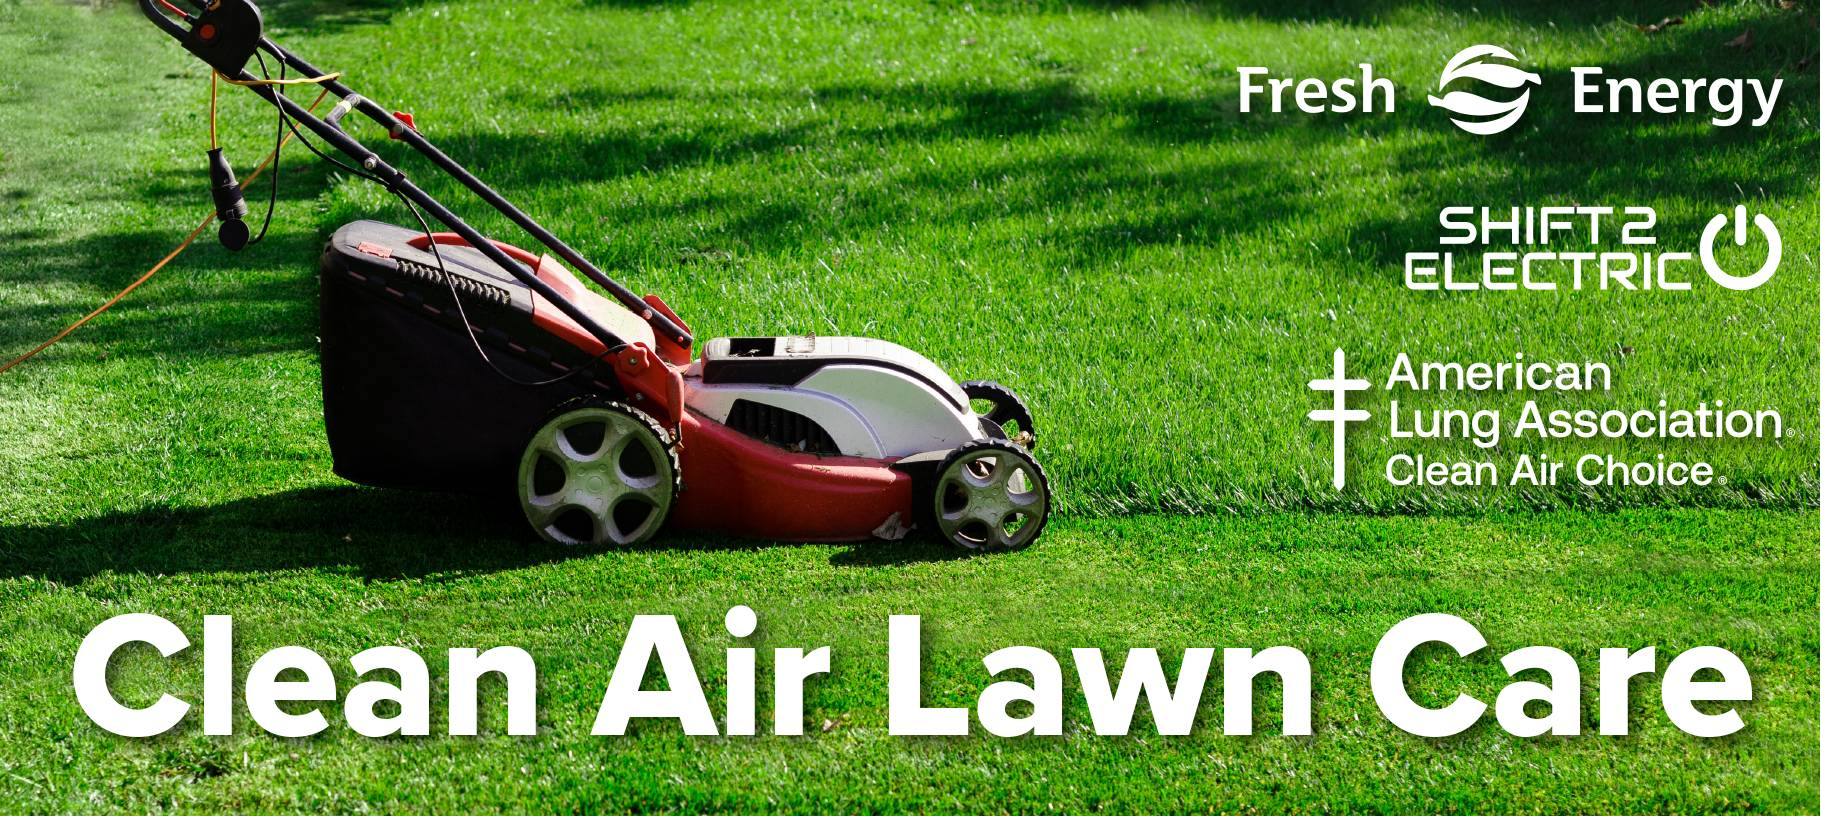 Clean Air Lawn Care event cover image